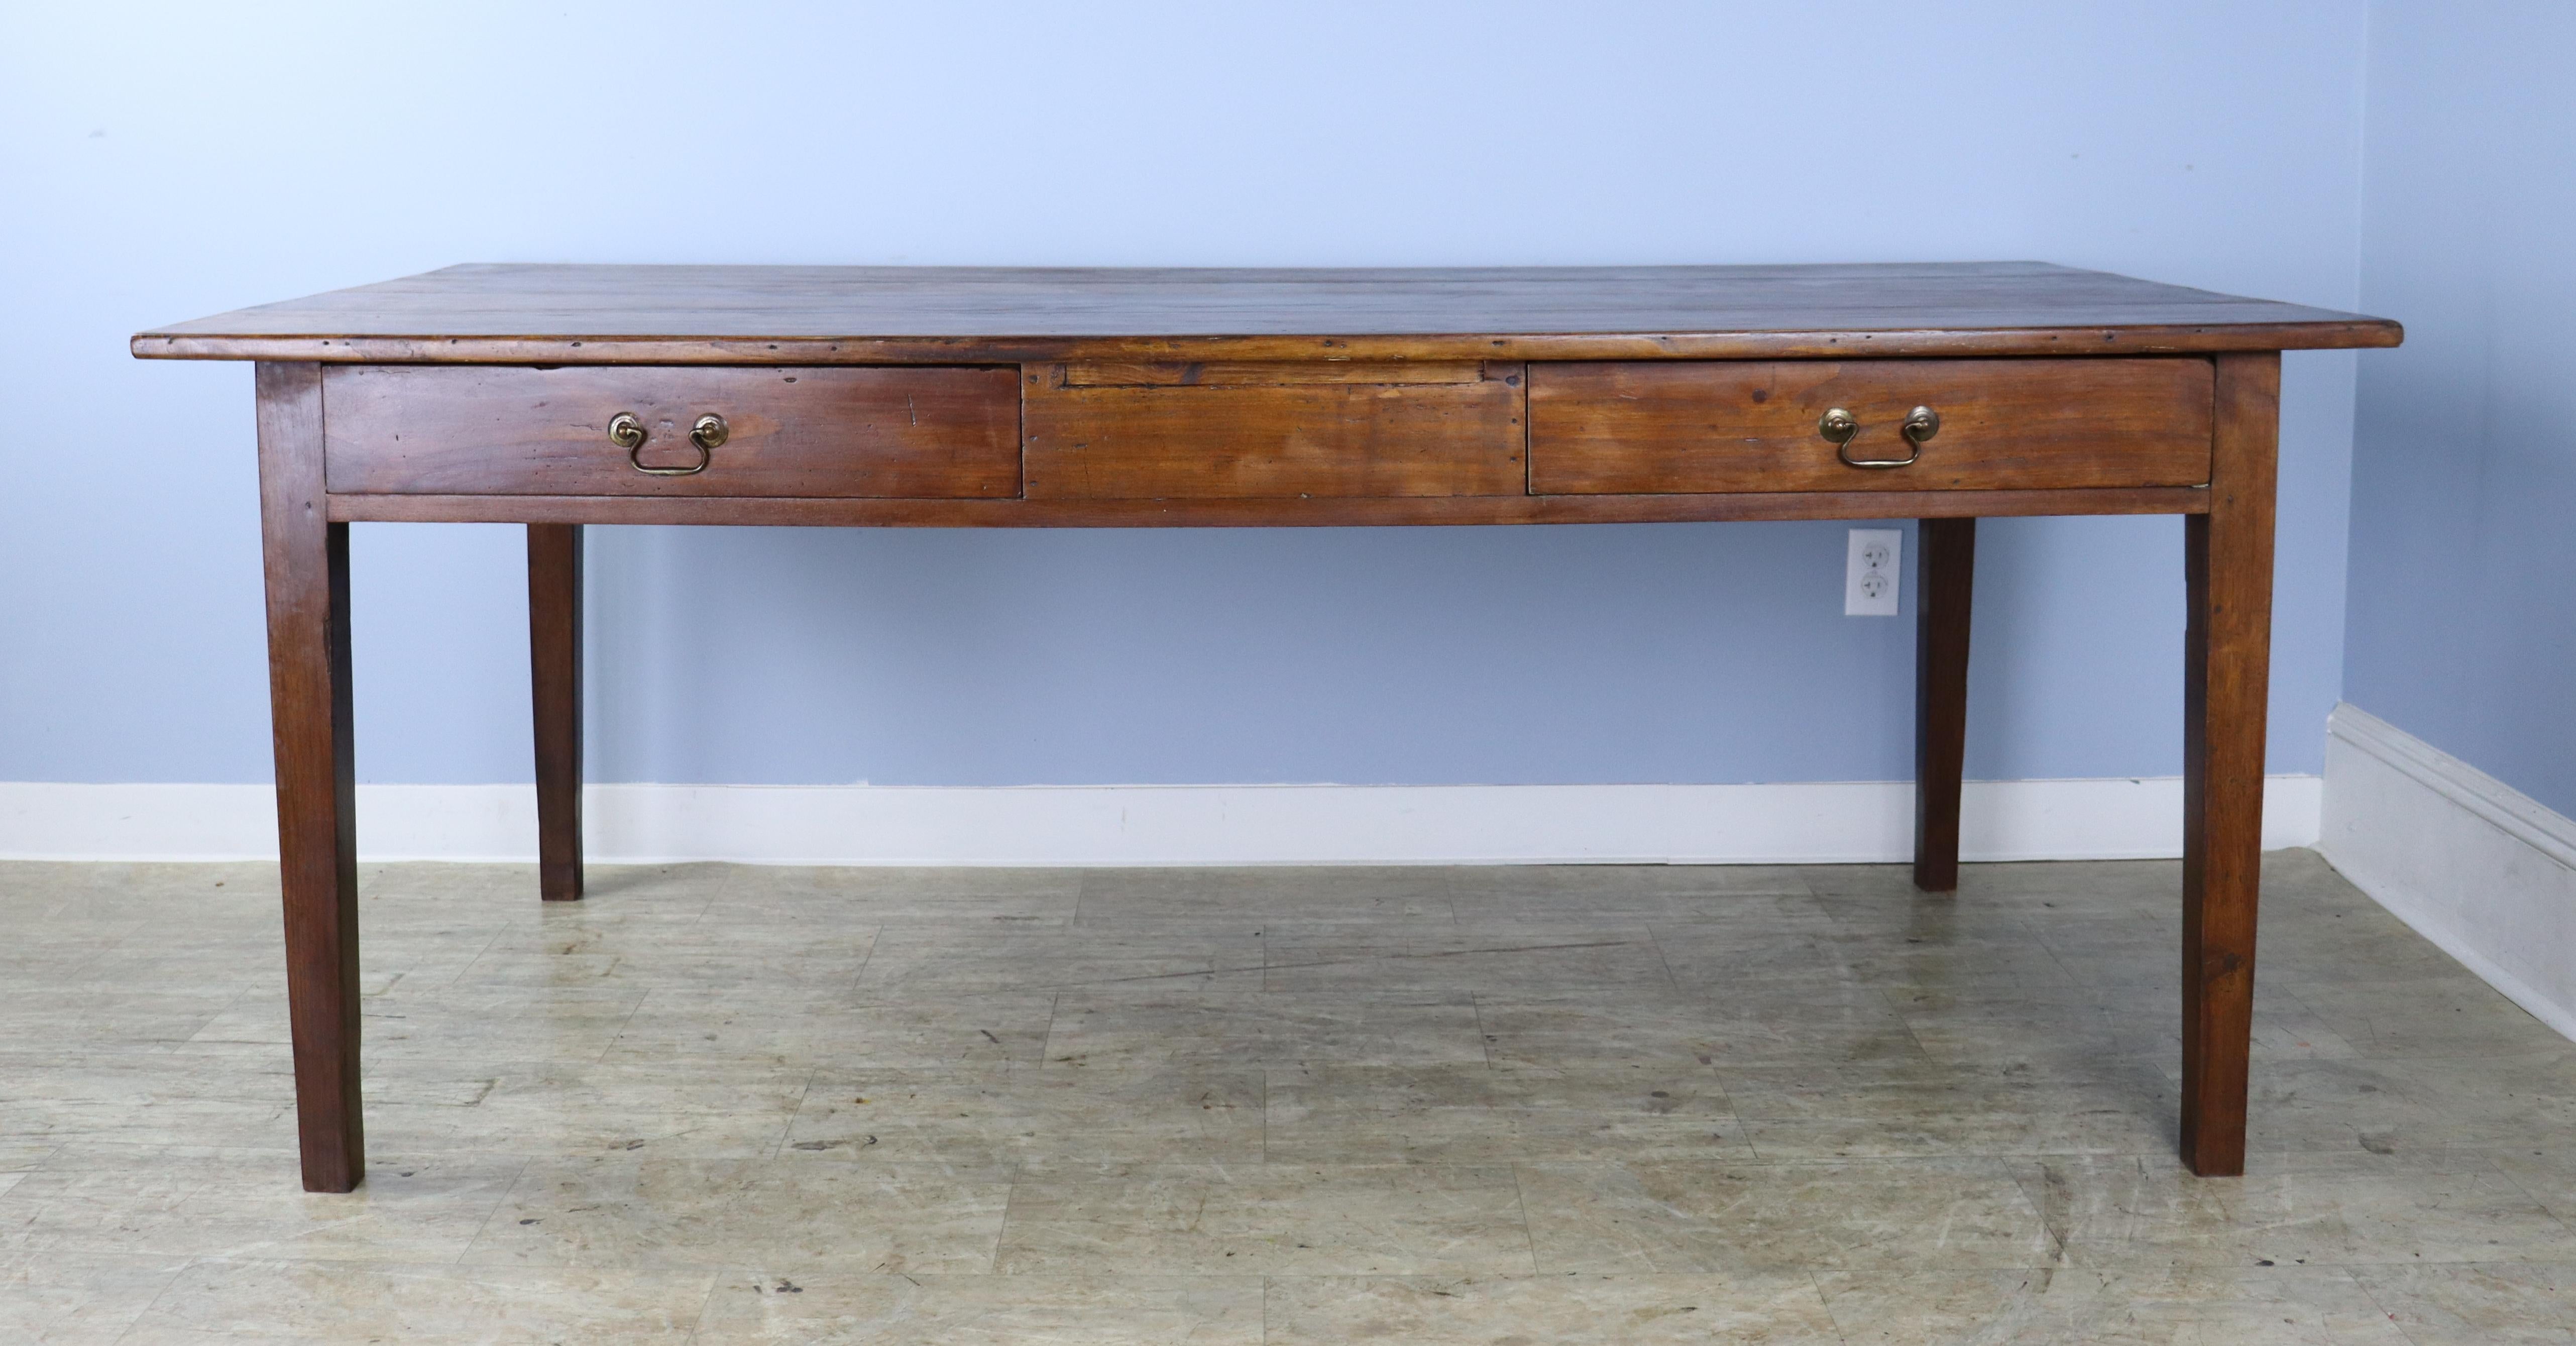 19th Century Fruitwood Farm Table / Desk with 4 Drawers